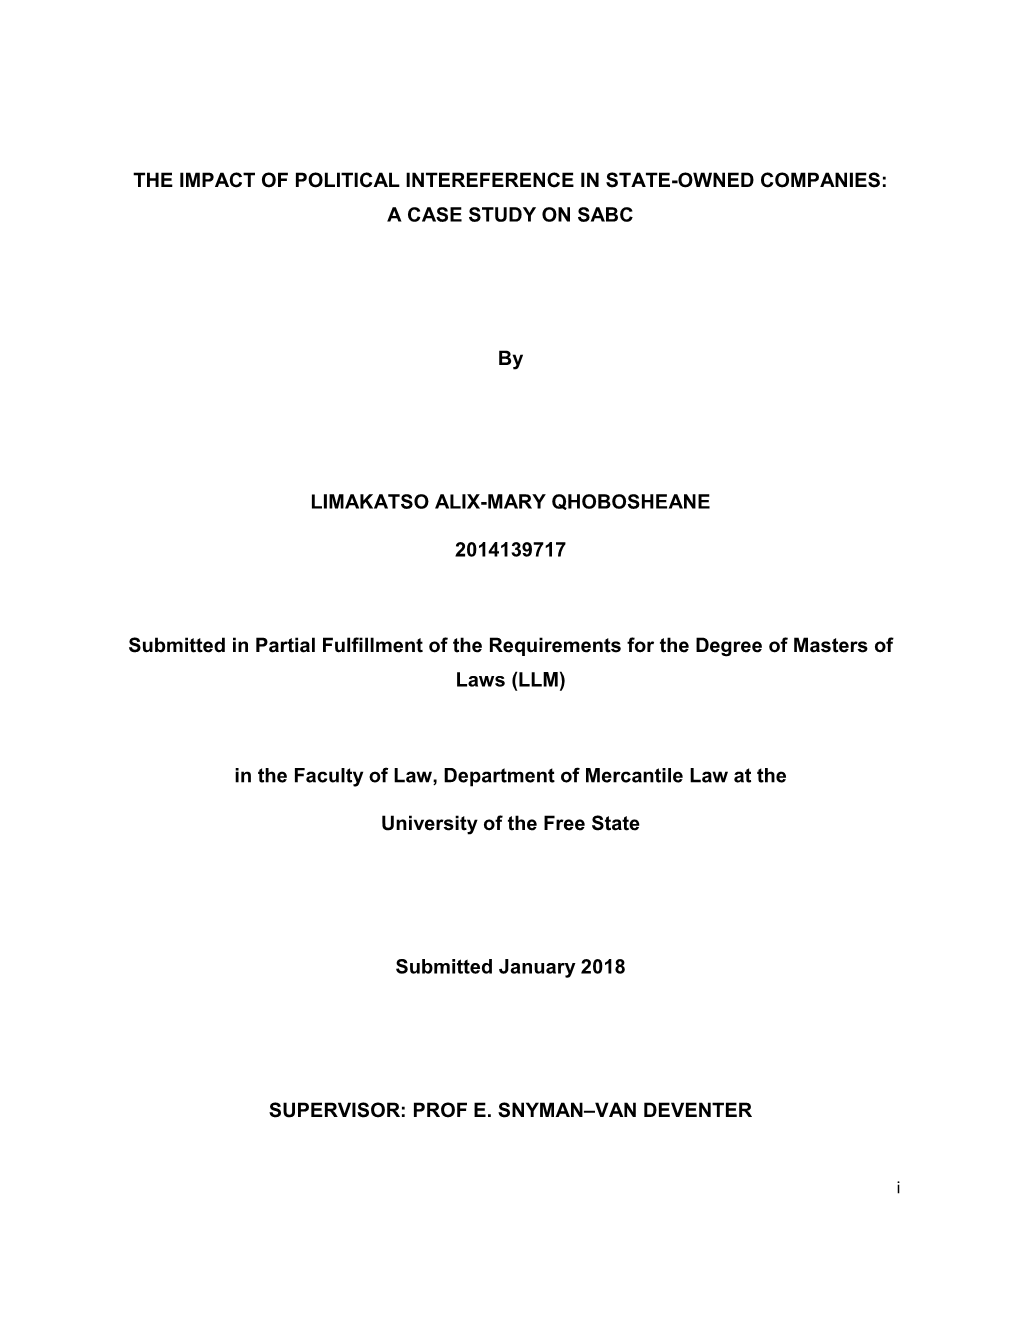 The Impact of Political Intereference in State-Owned Companies: a Case Study on Sabc